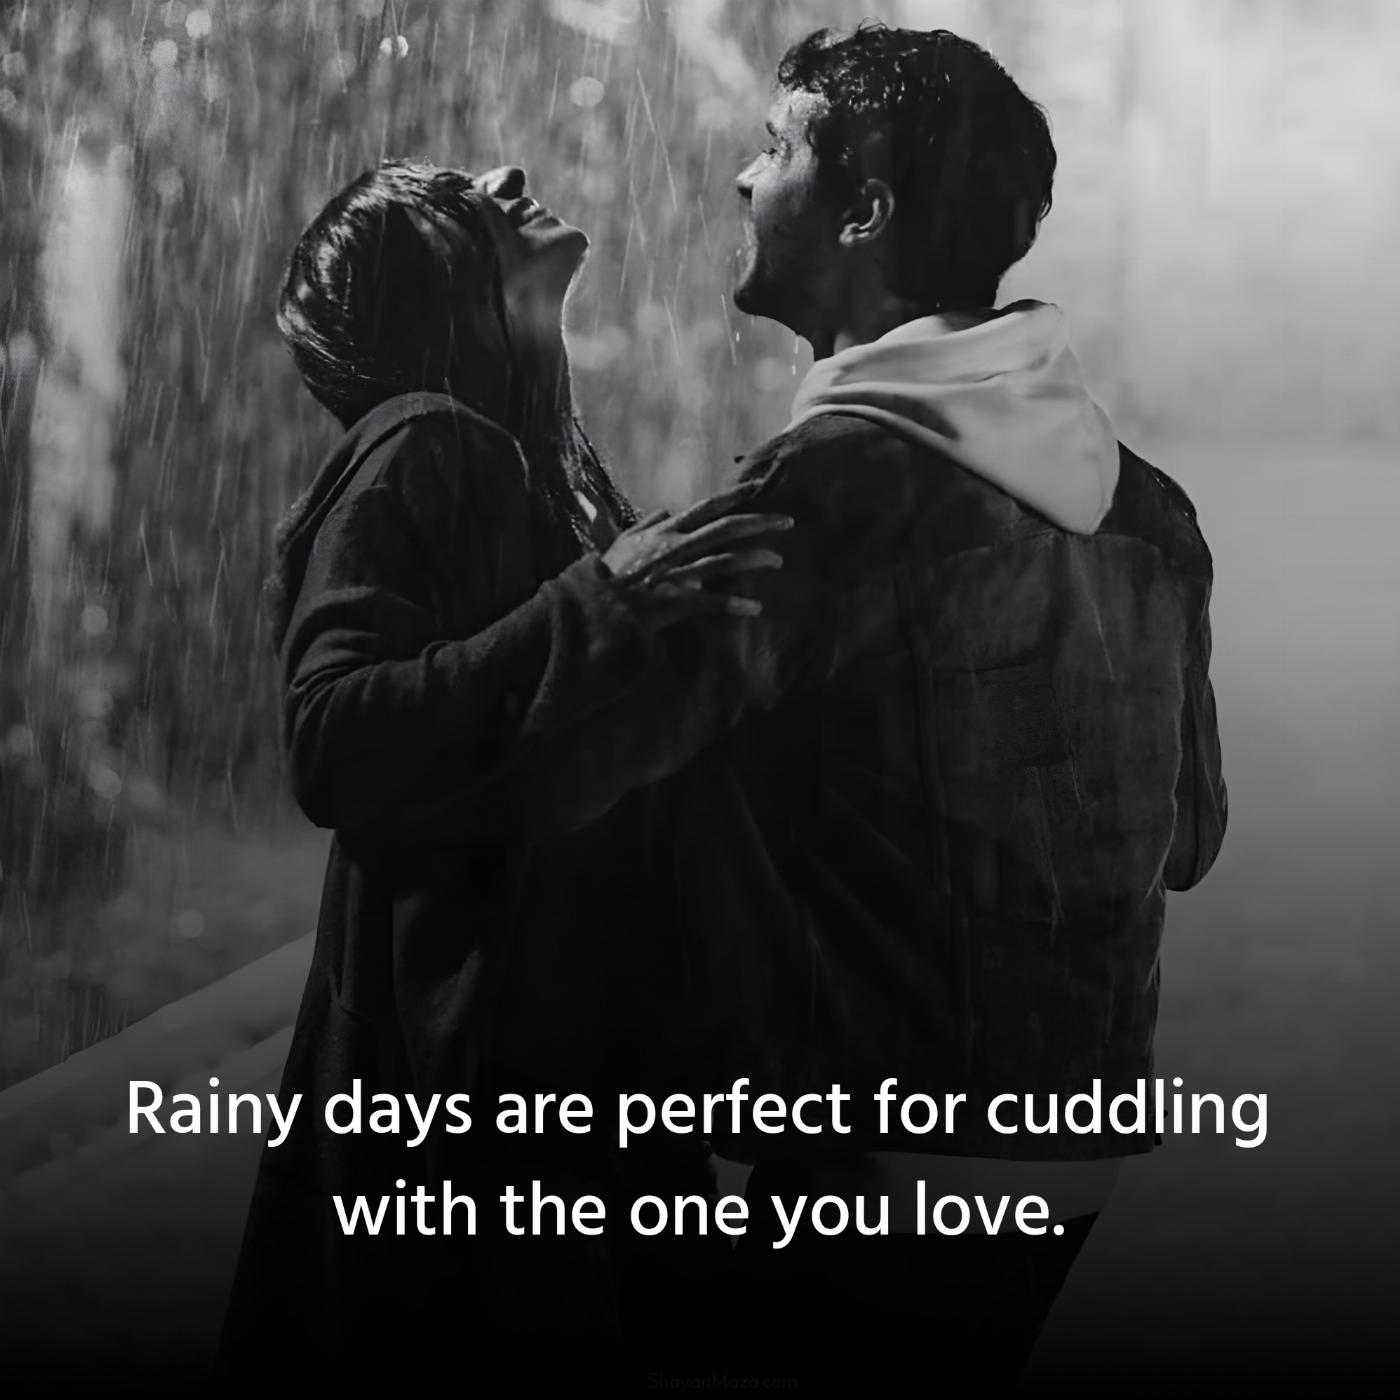 Rainy days are perfect for cuddling with the one you love